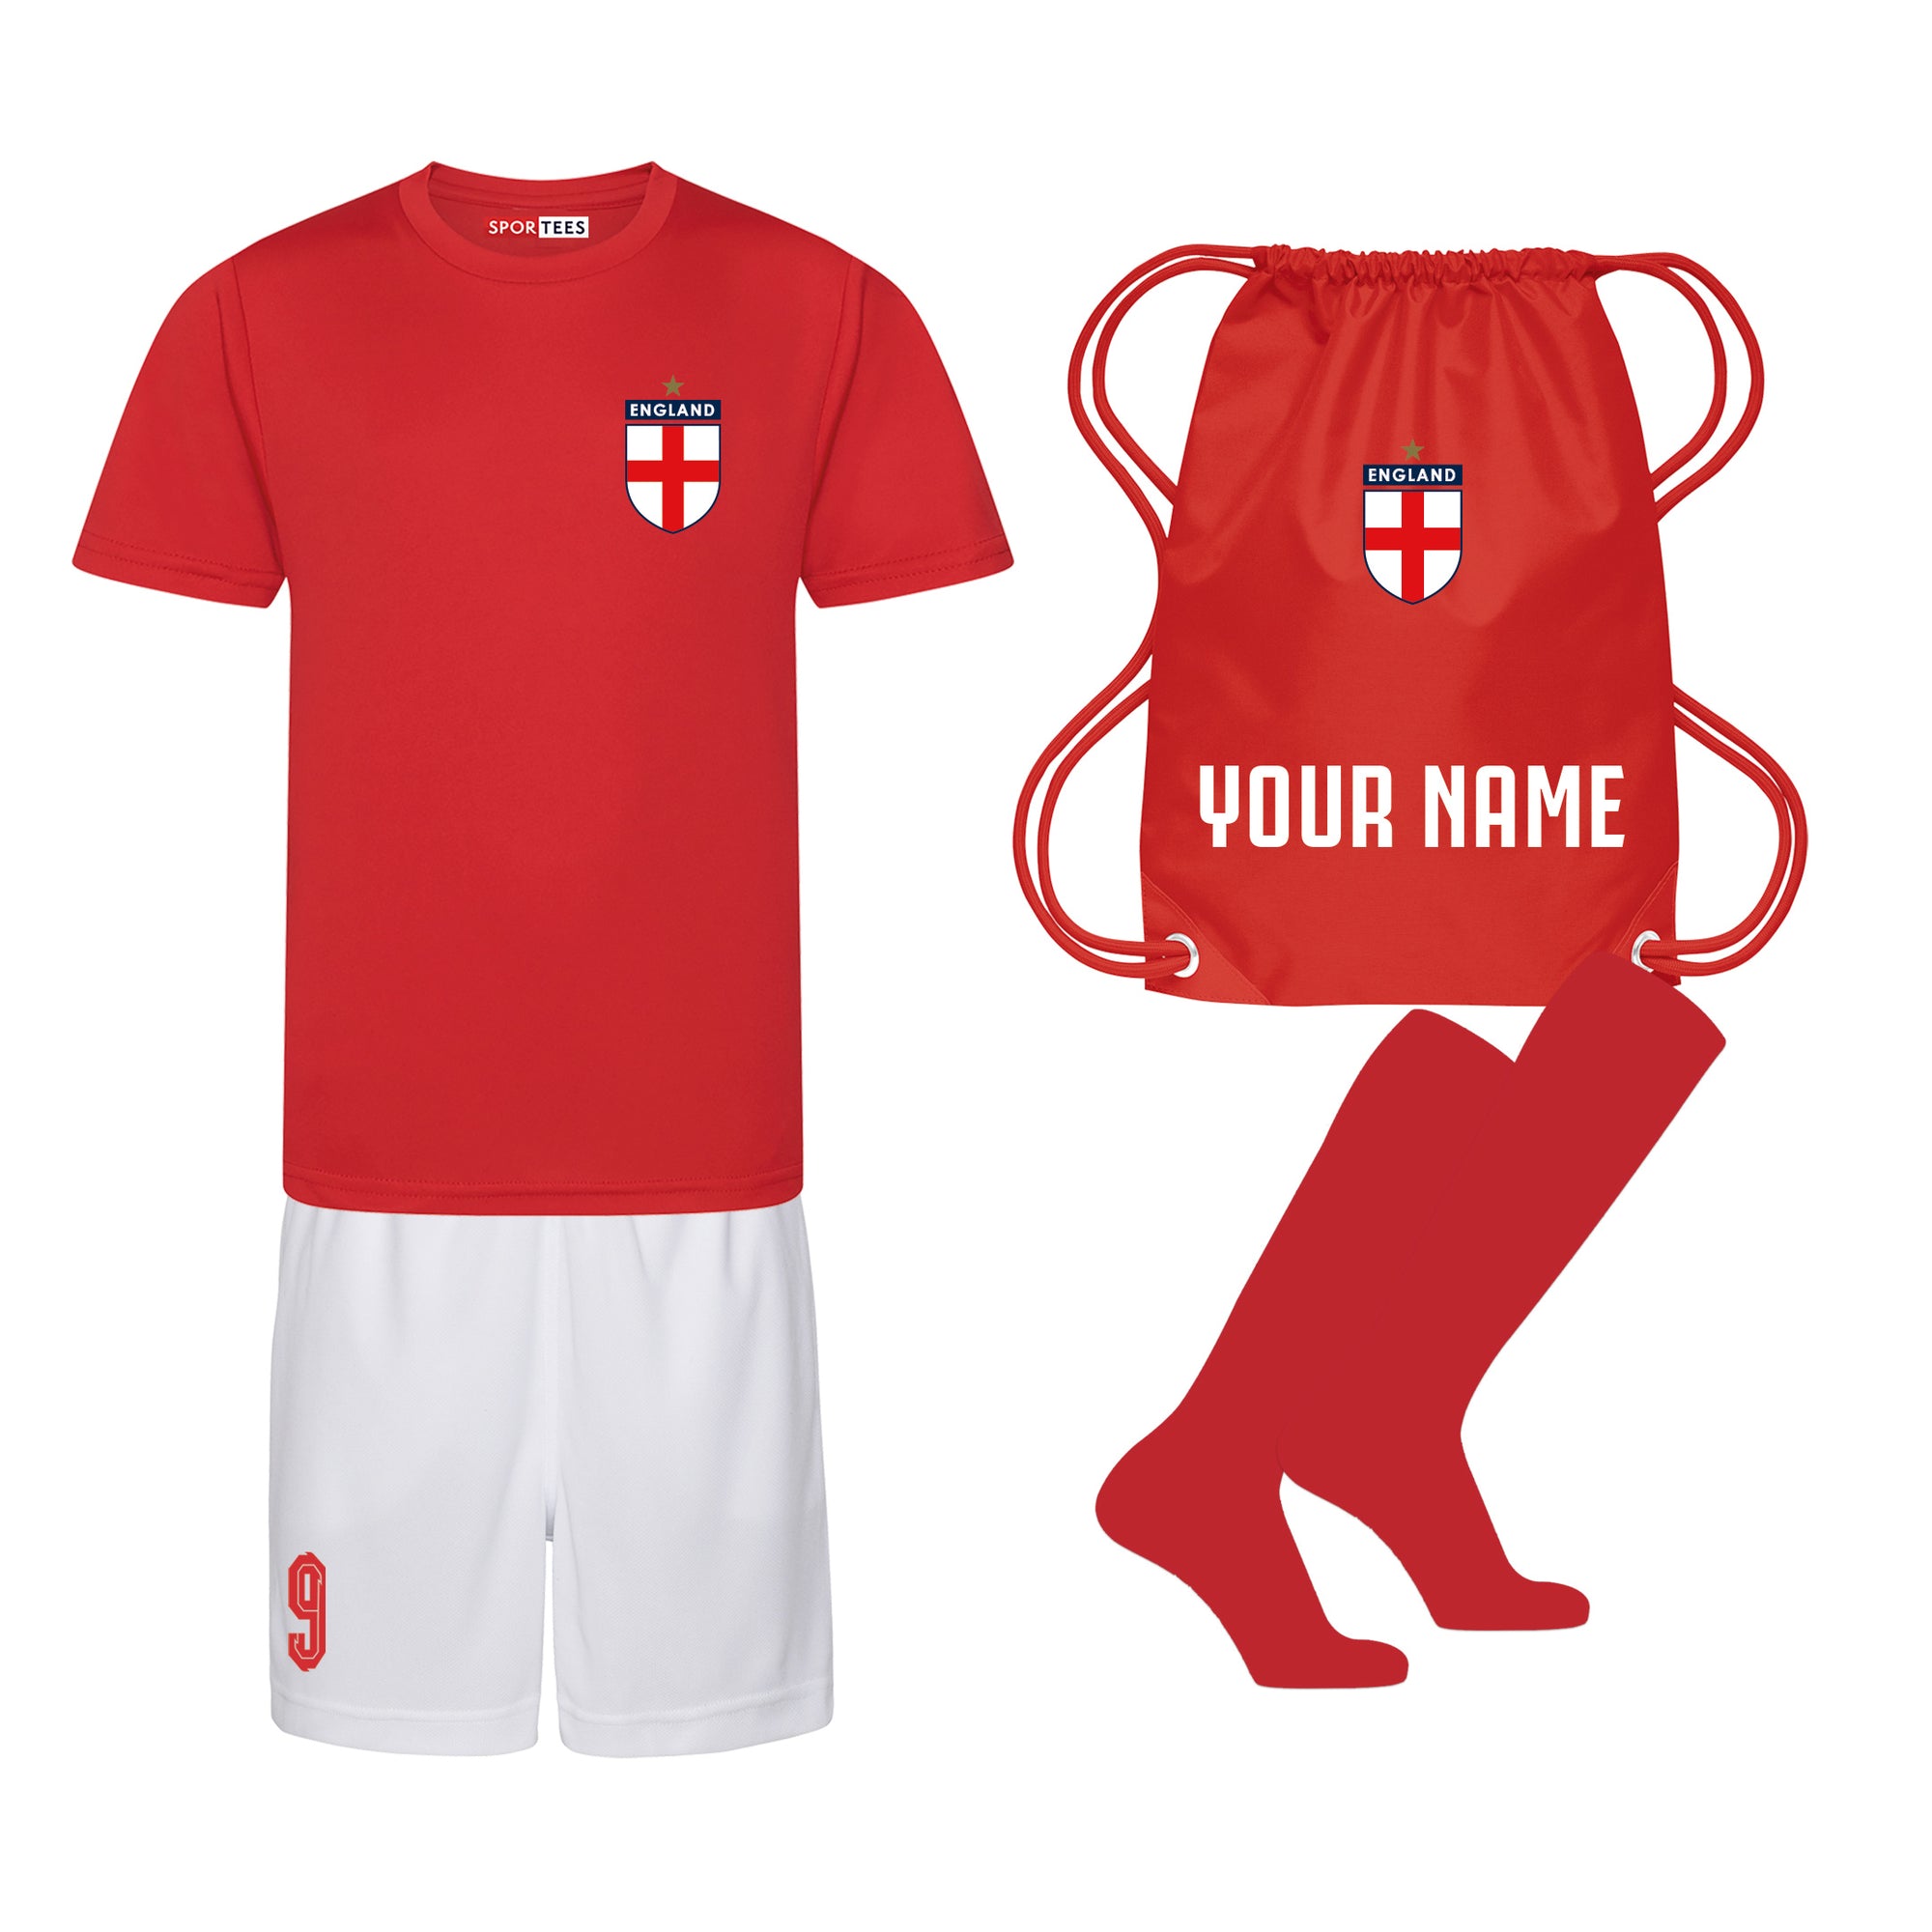 Personalised England Style Red & White Away Kit Bundle With Socks & Bag